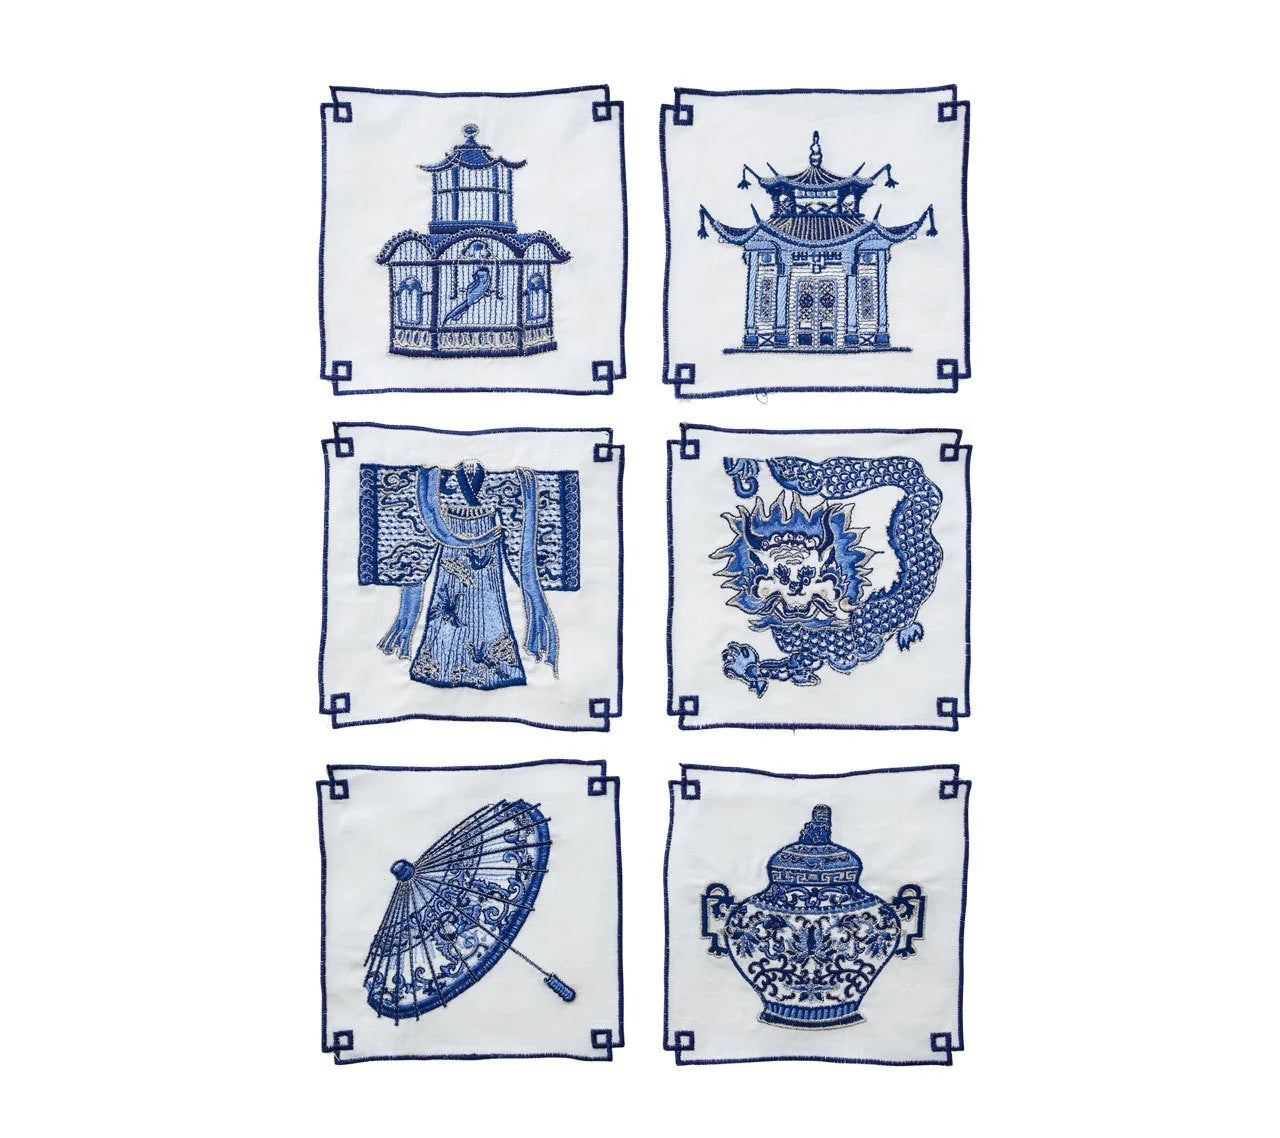 Indochine Cocktail Napkins in White & Blue, Set of 6 in a Gift Box